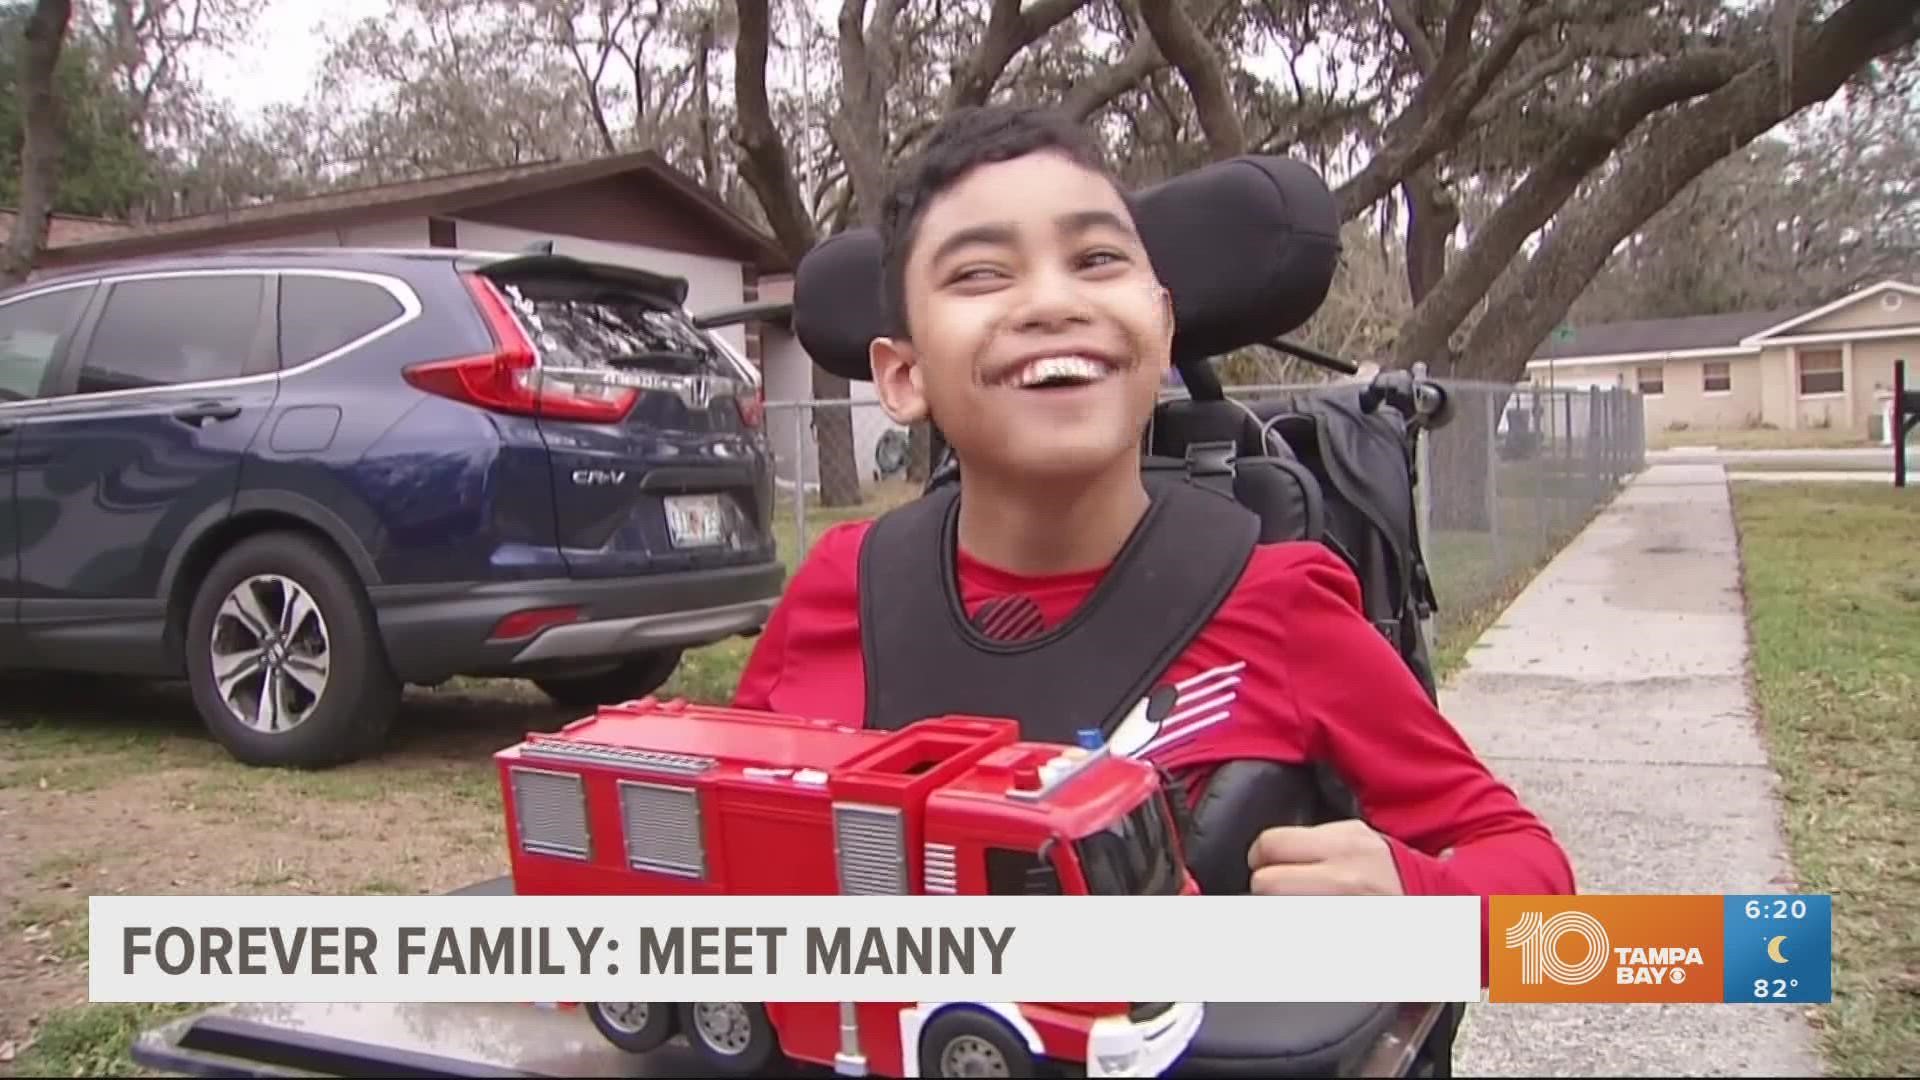 Manny loves trucks, being silly and making friends at school.